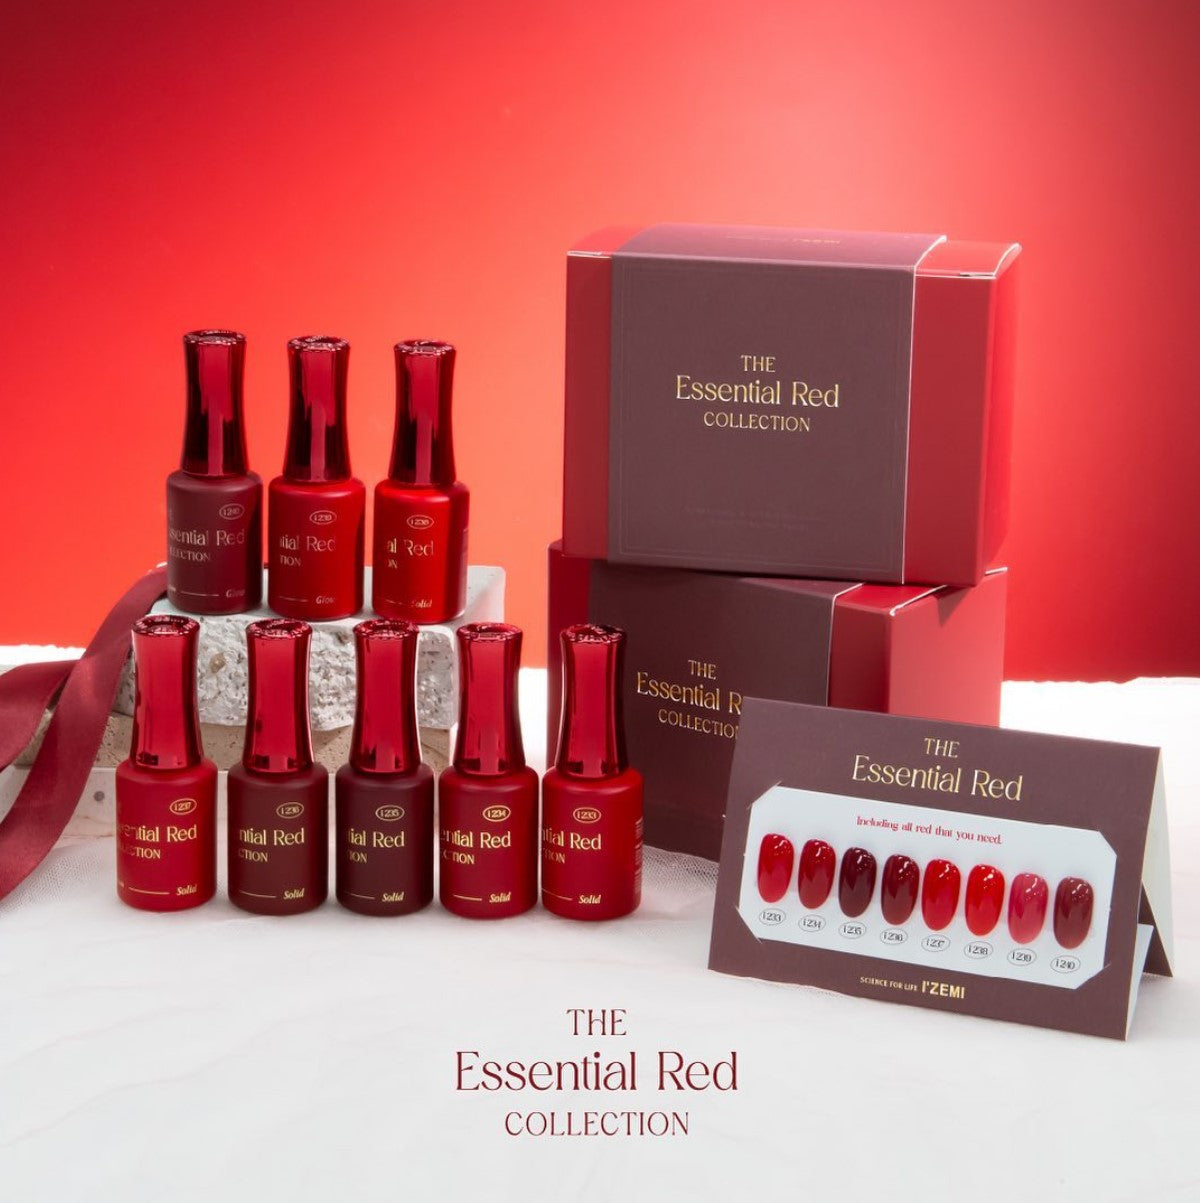 Izemi - The Essential Red Collection